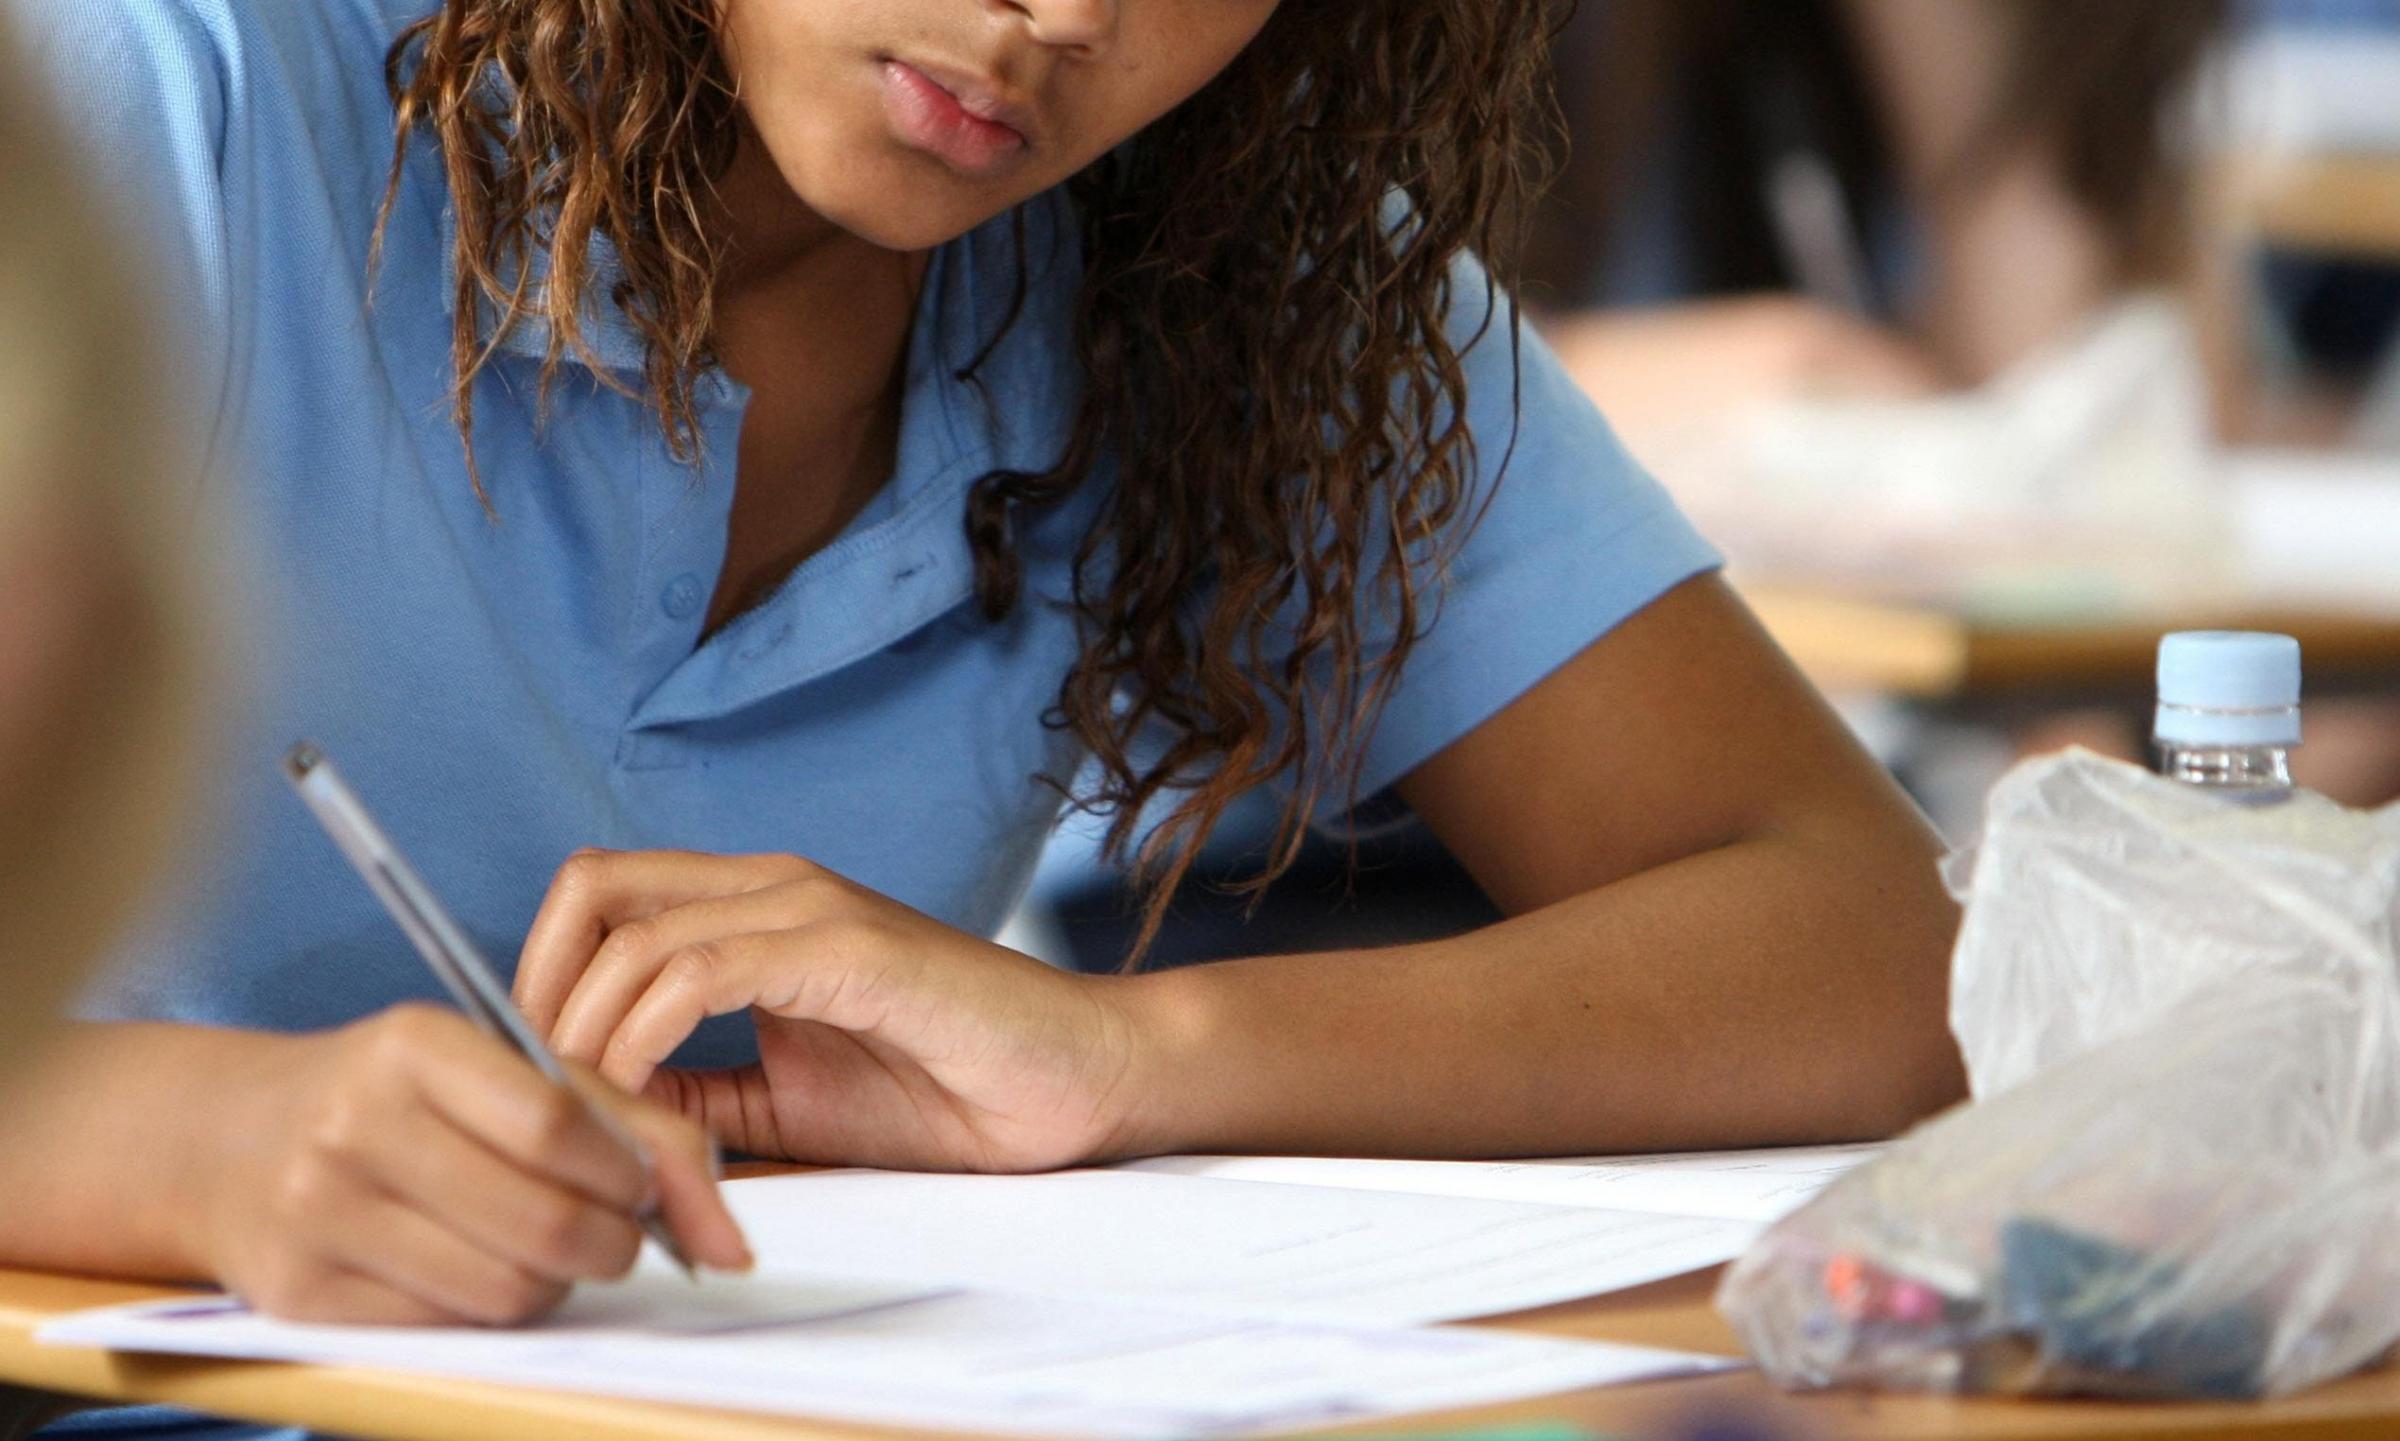 Council will be urged to write to Scottish Government over 'lack of confidence' in SQA